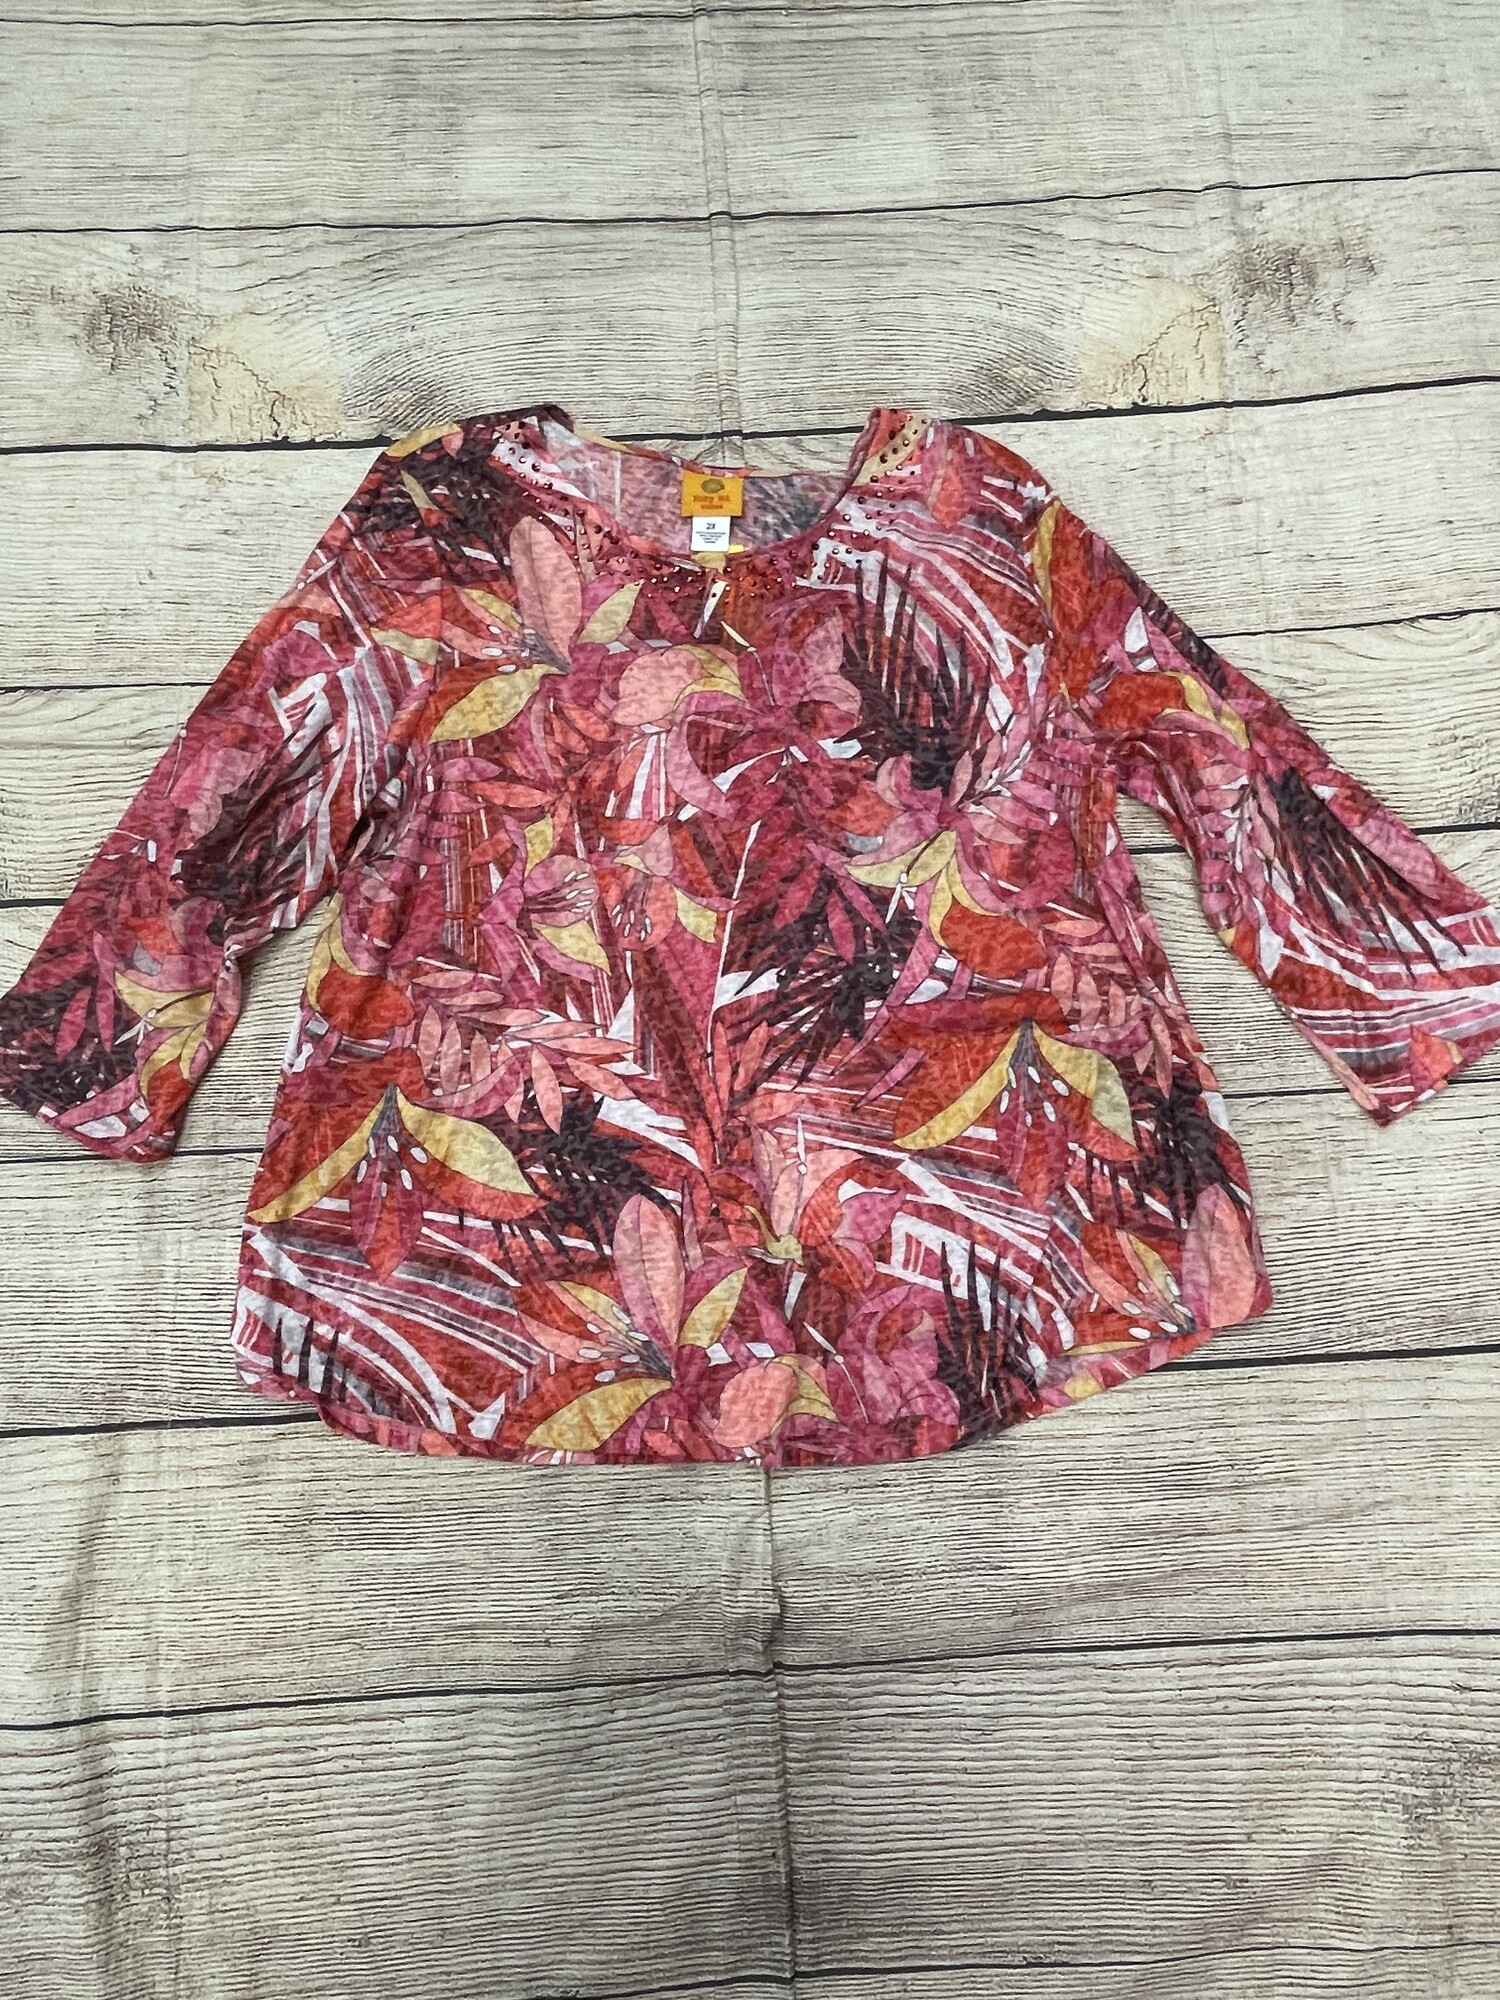 Ruby Rd Top, 3/4 Sleeve, Pink Floral Pattern with Rhinestones Around the Neckline, Size: 2x